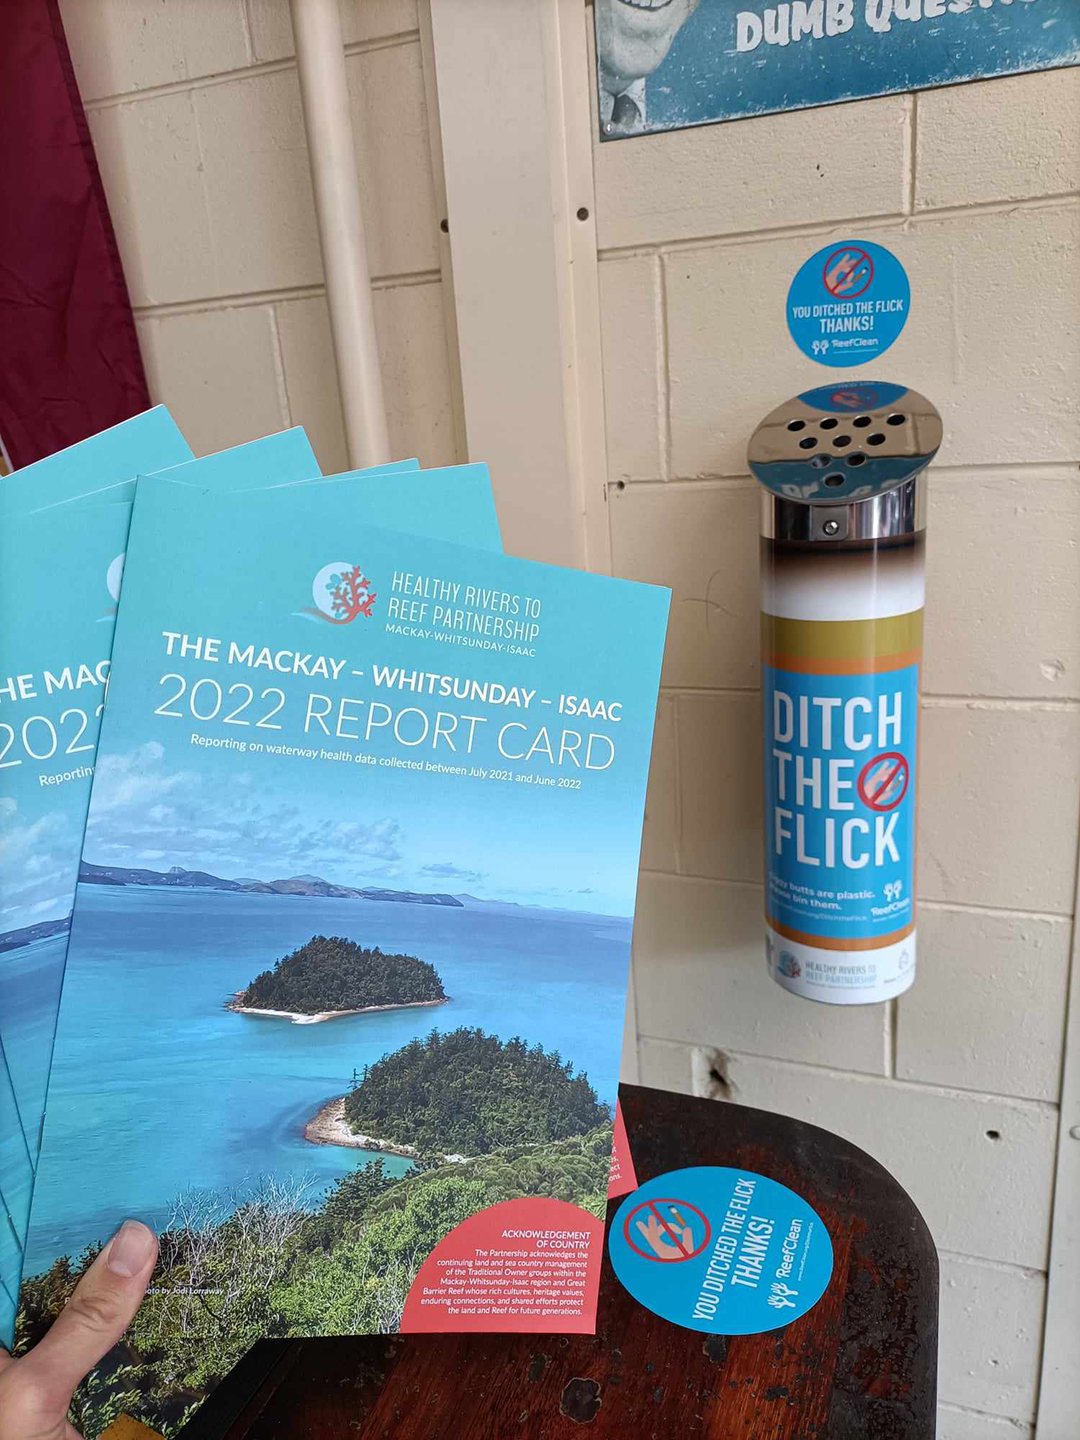 Copies of the 2022 Report Card next to a cigarette butt bin.